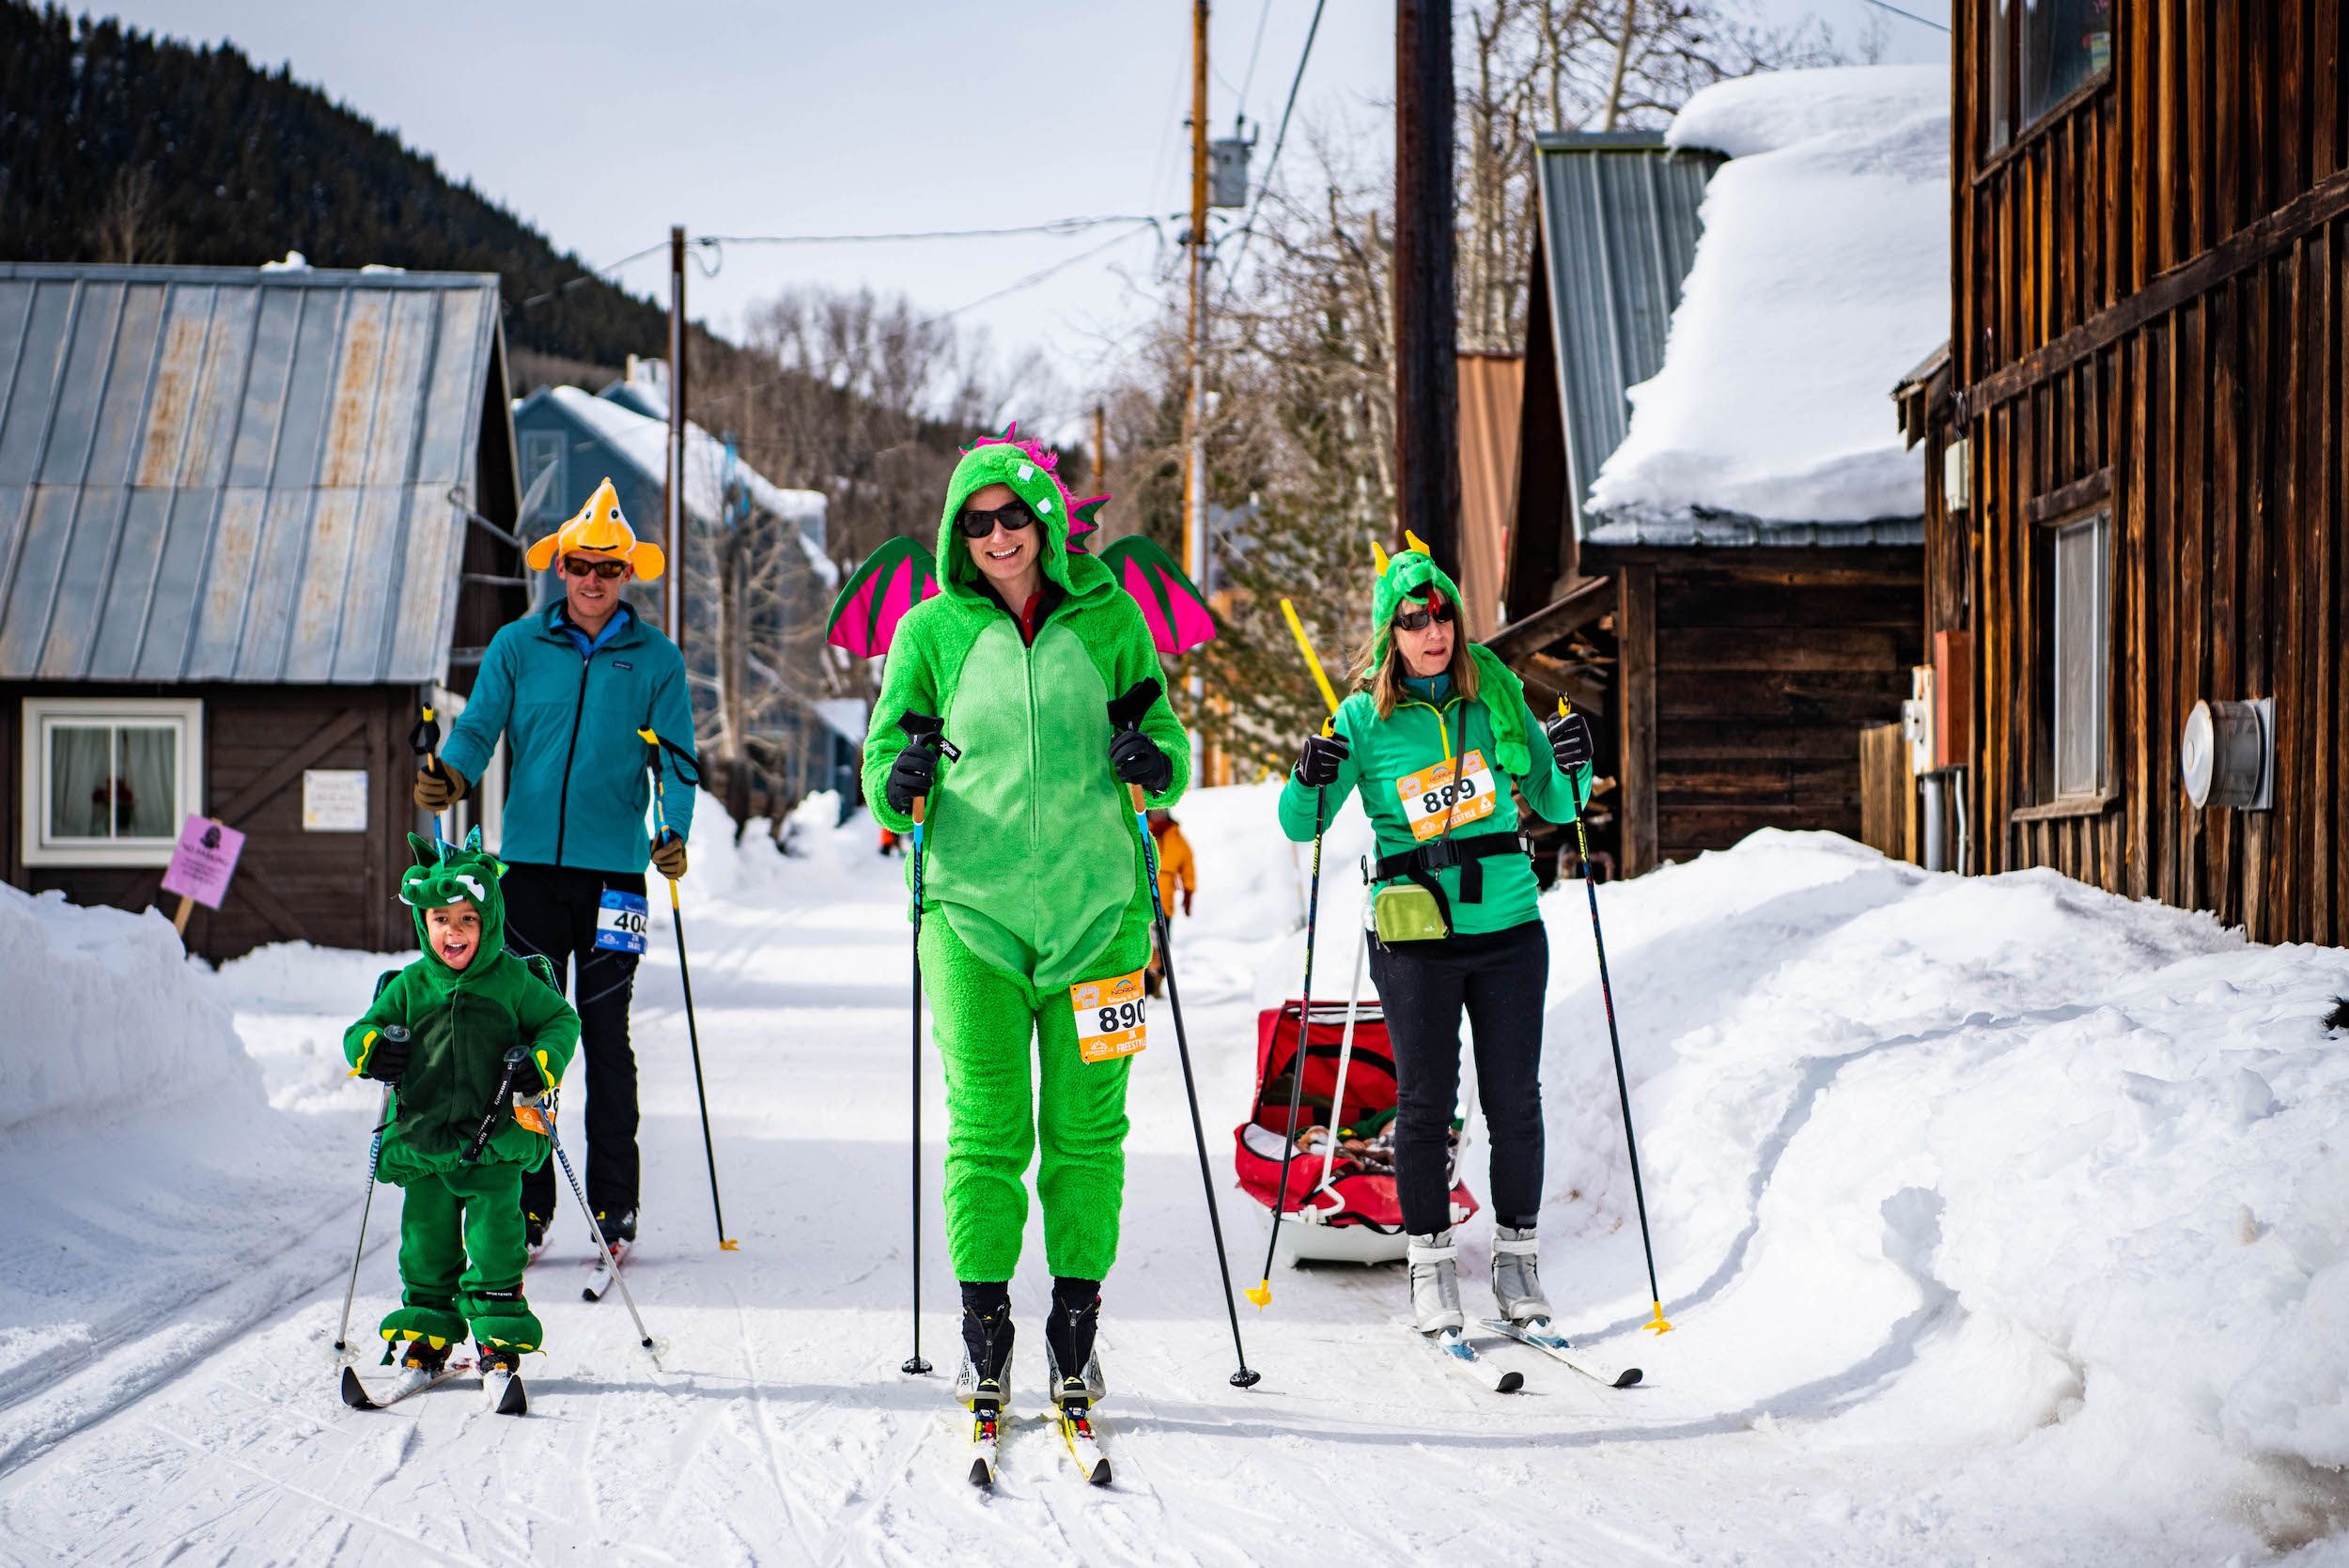 A group of people dressed like dinosaurs on skinny skis on a snowy road